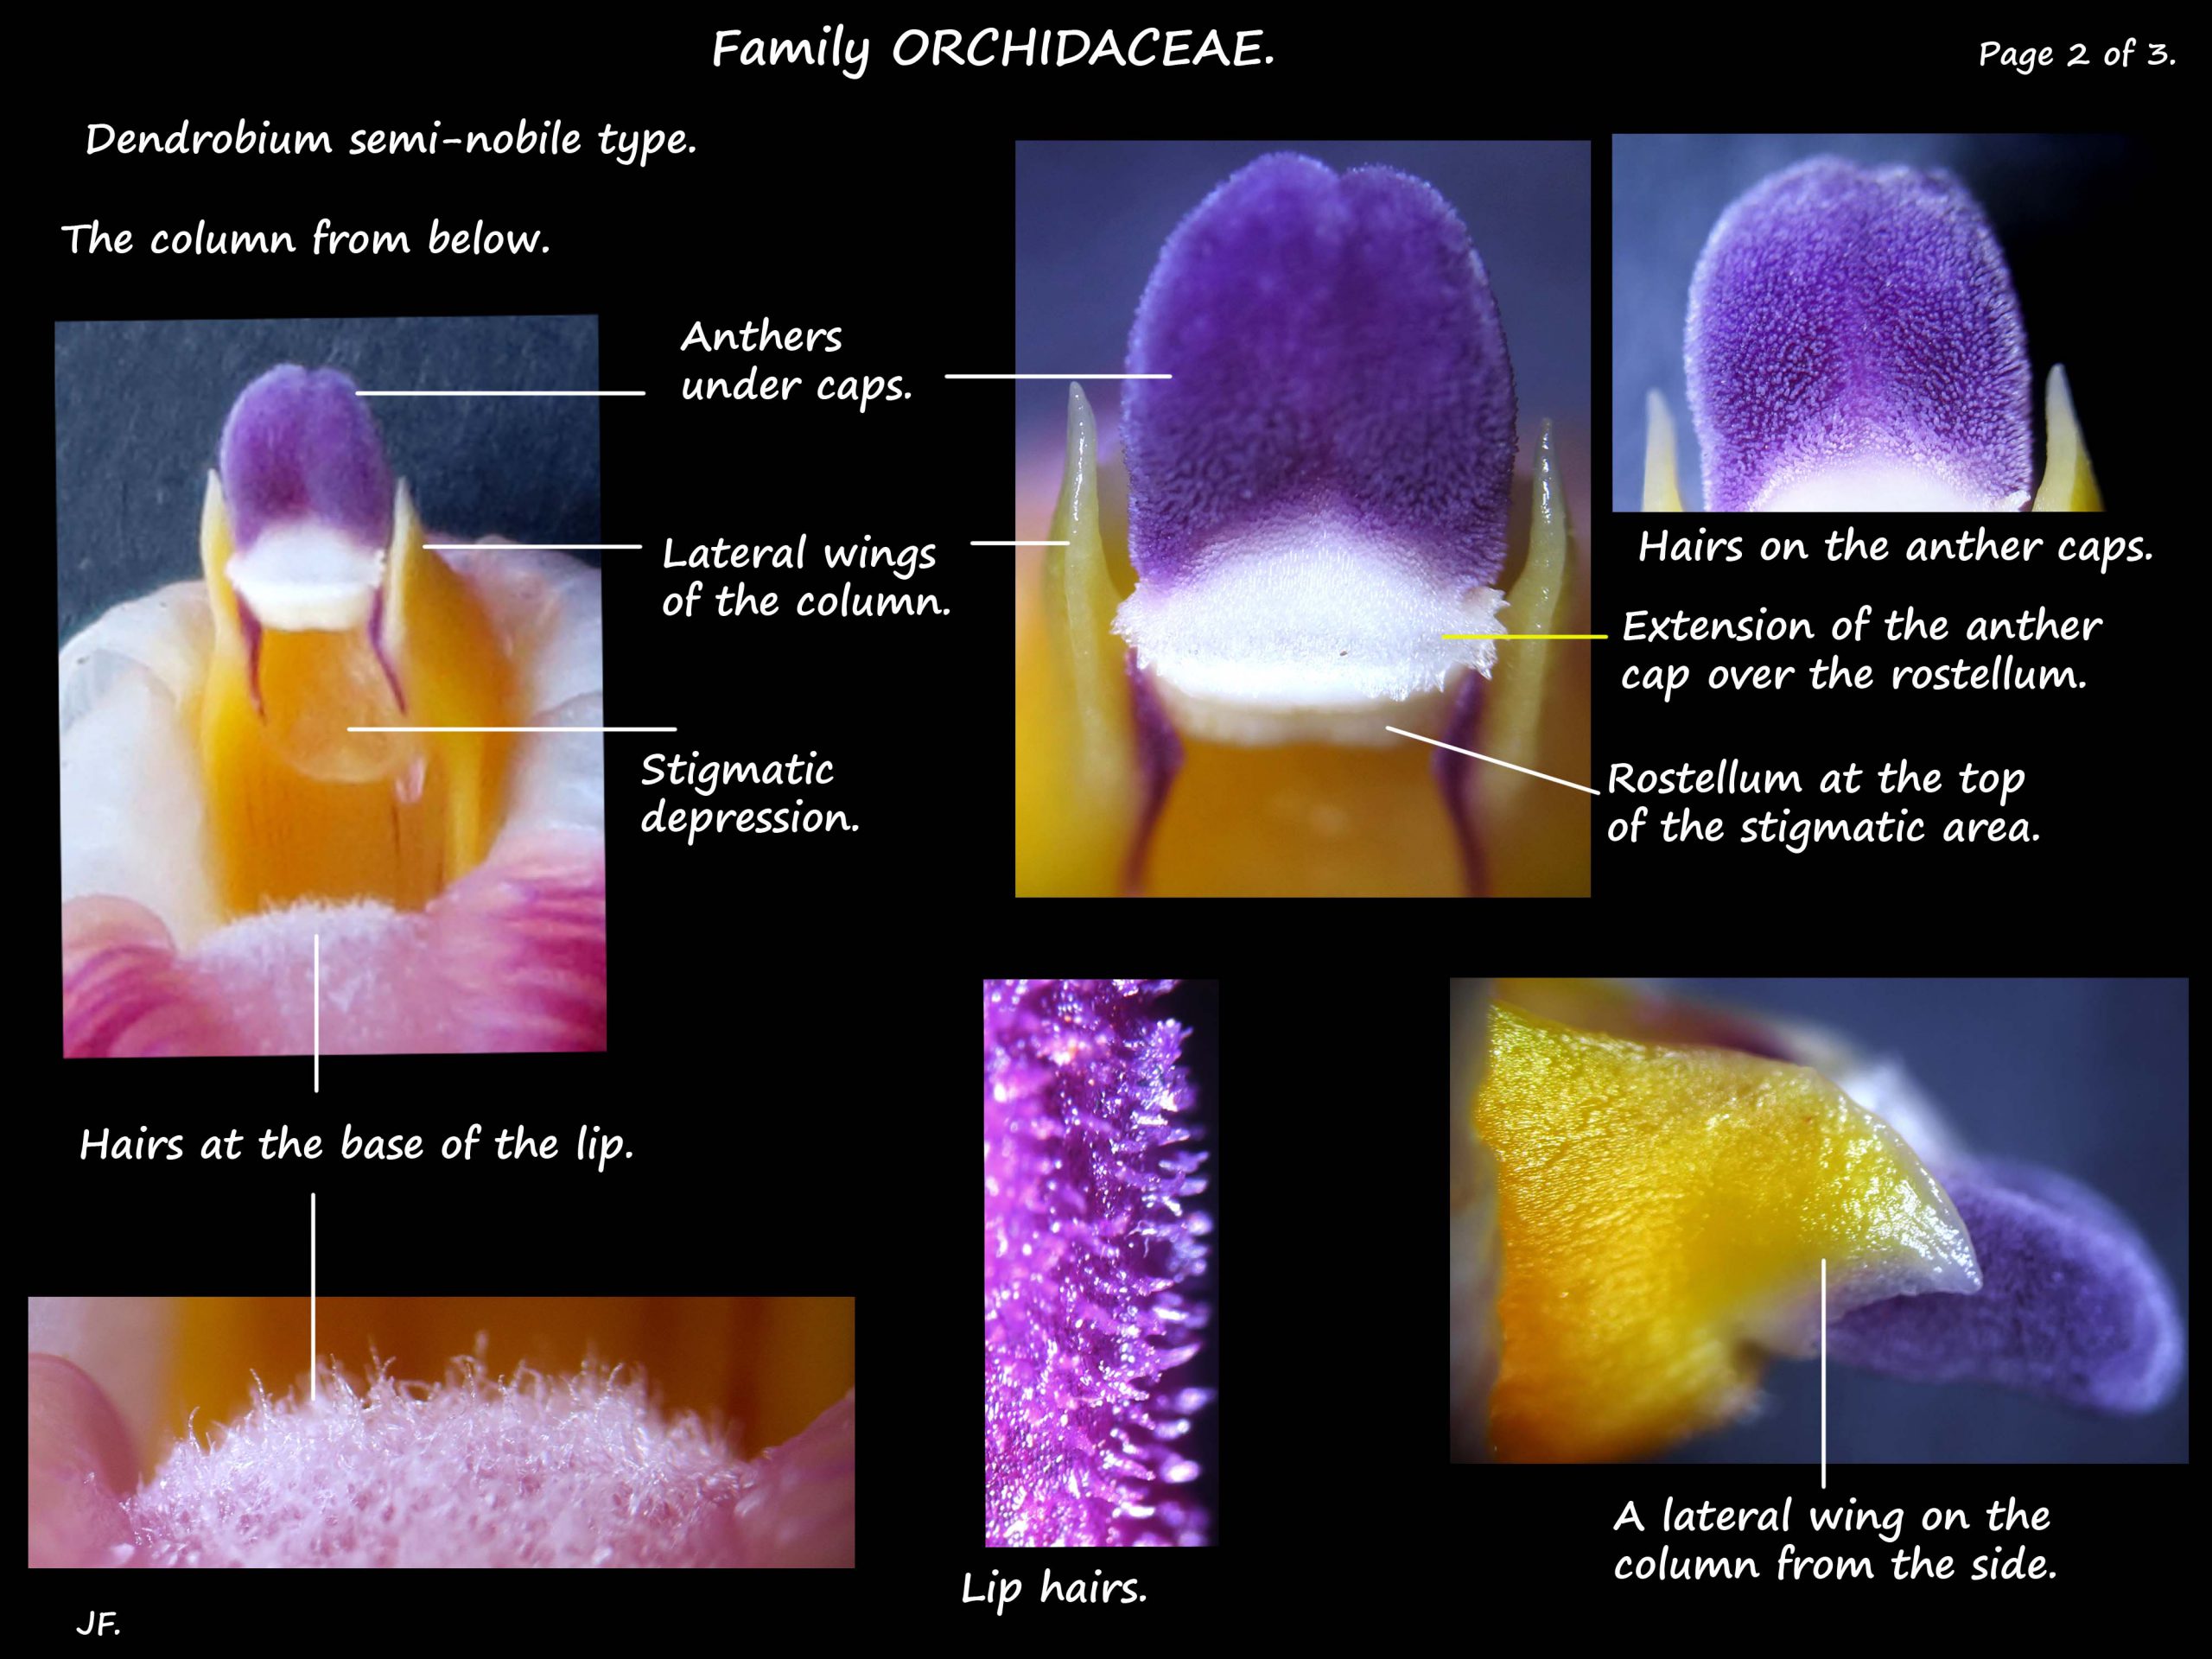 7 Microscopic features of the Dendrobium column